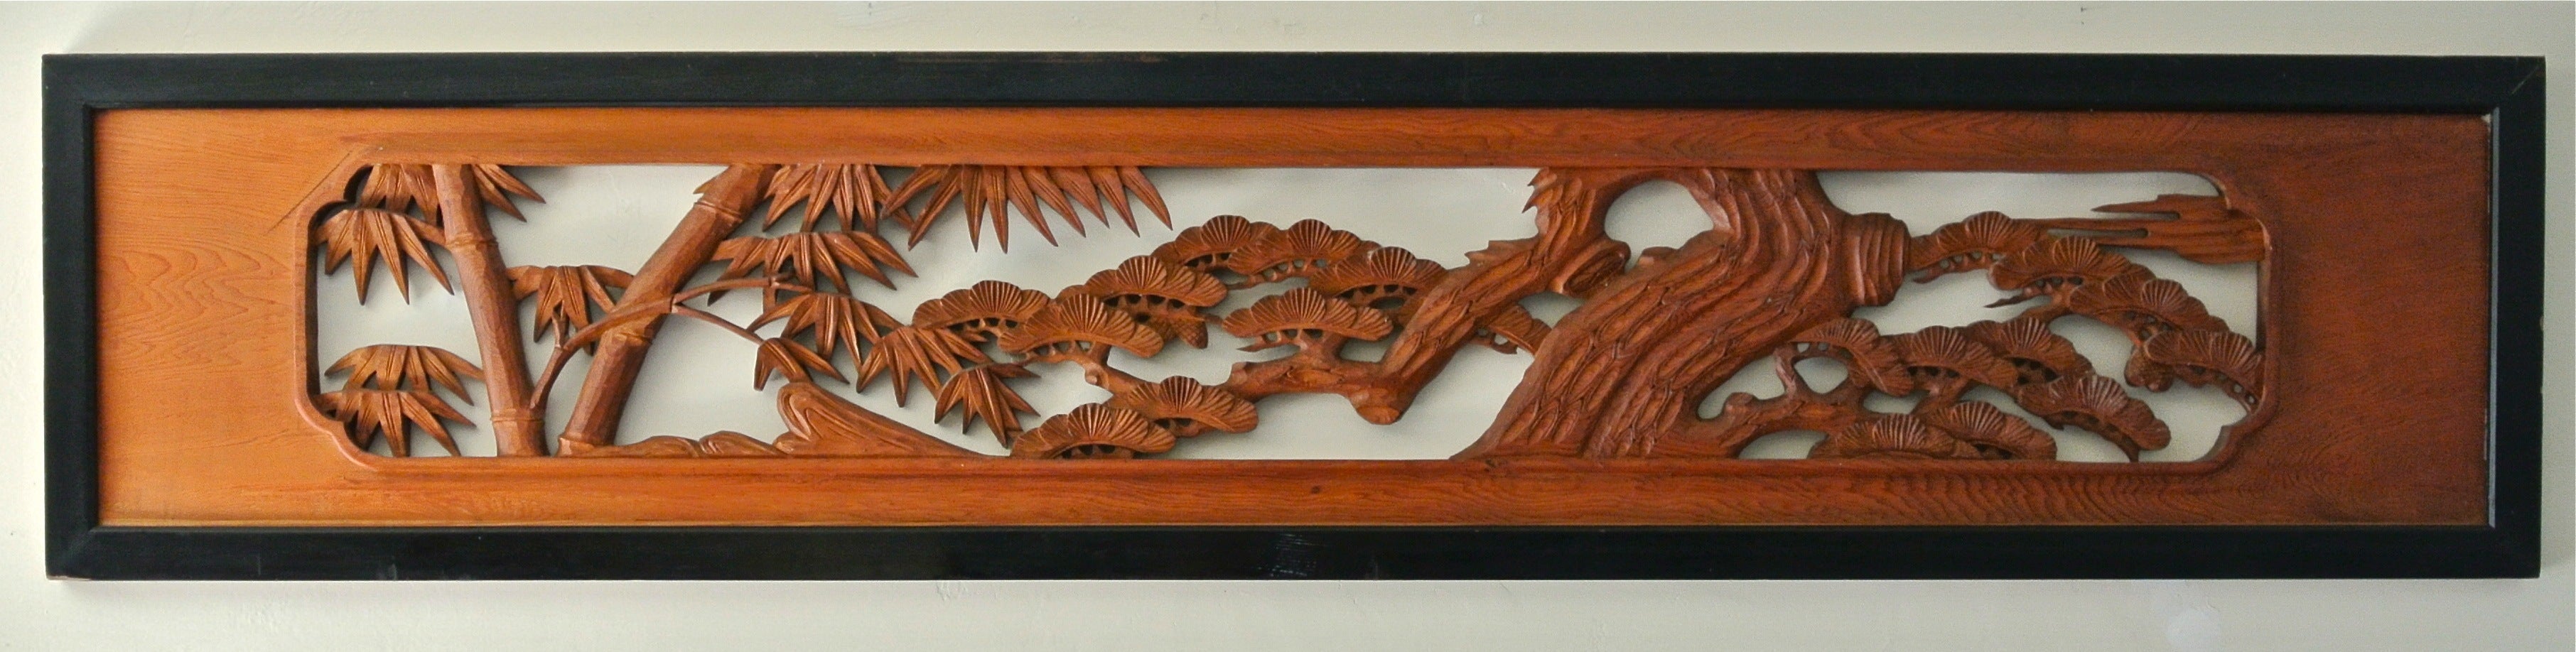 Japanese Carved Wood Ramna, 'Architectural Transom'